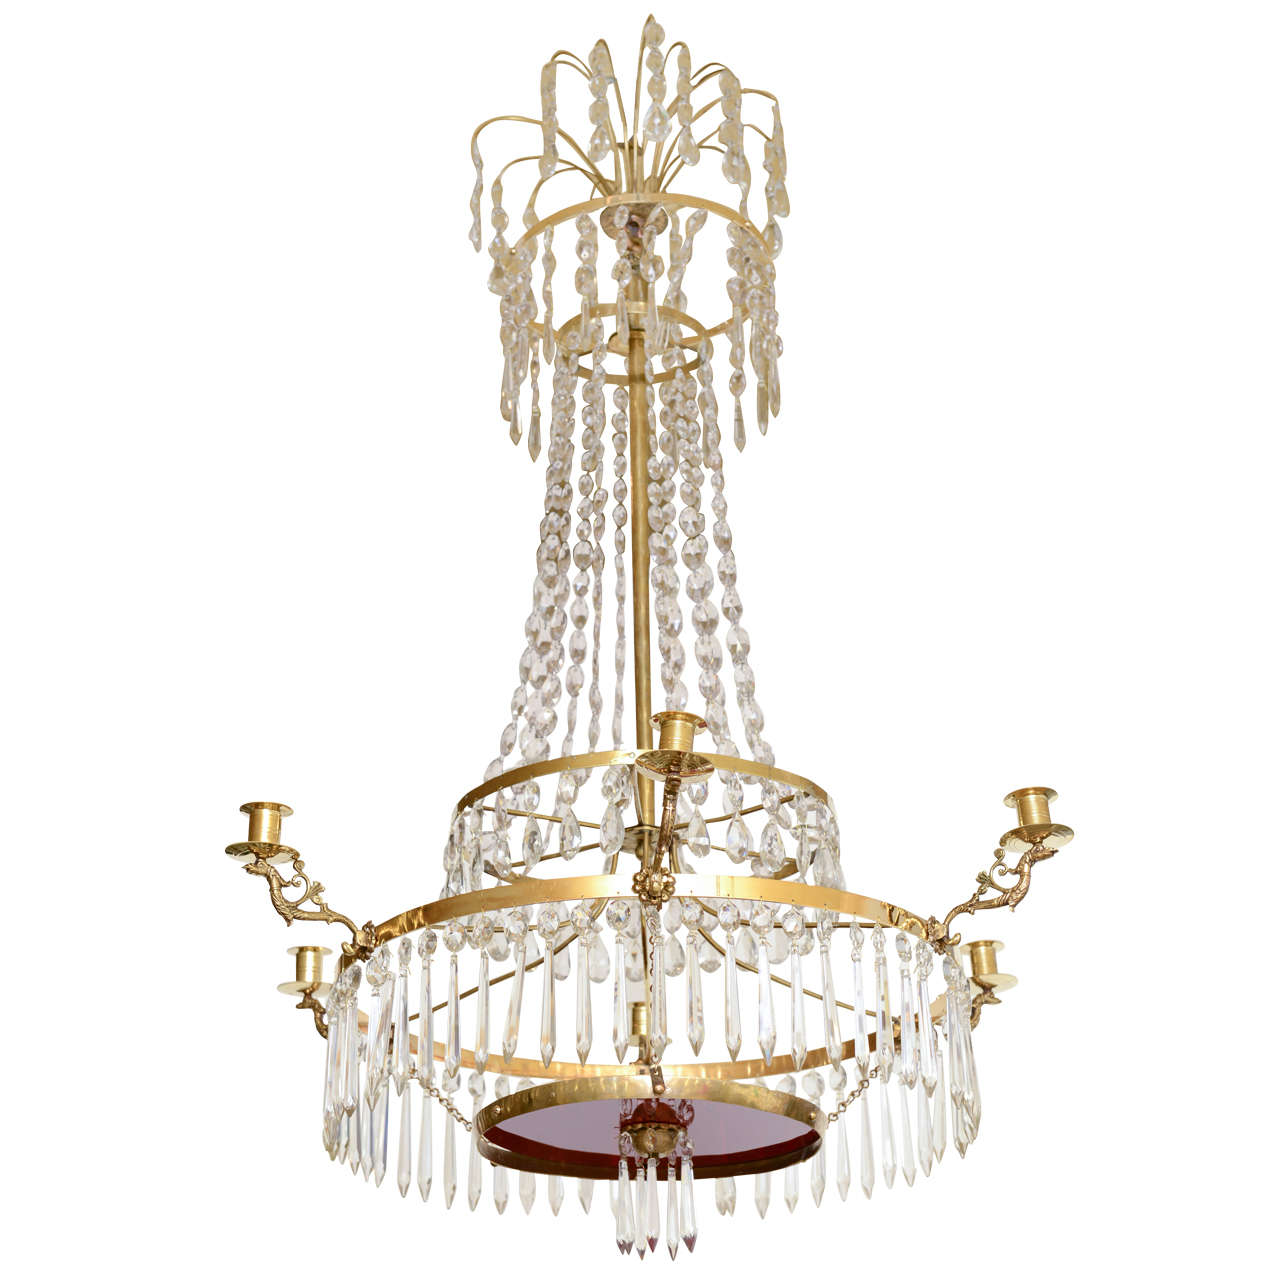  Antique Baltic Crystal Chandelier  Early 19th Century For Sale